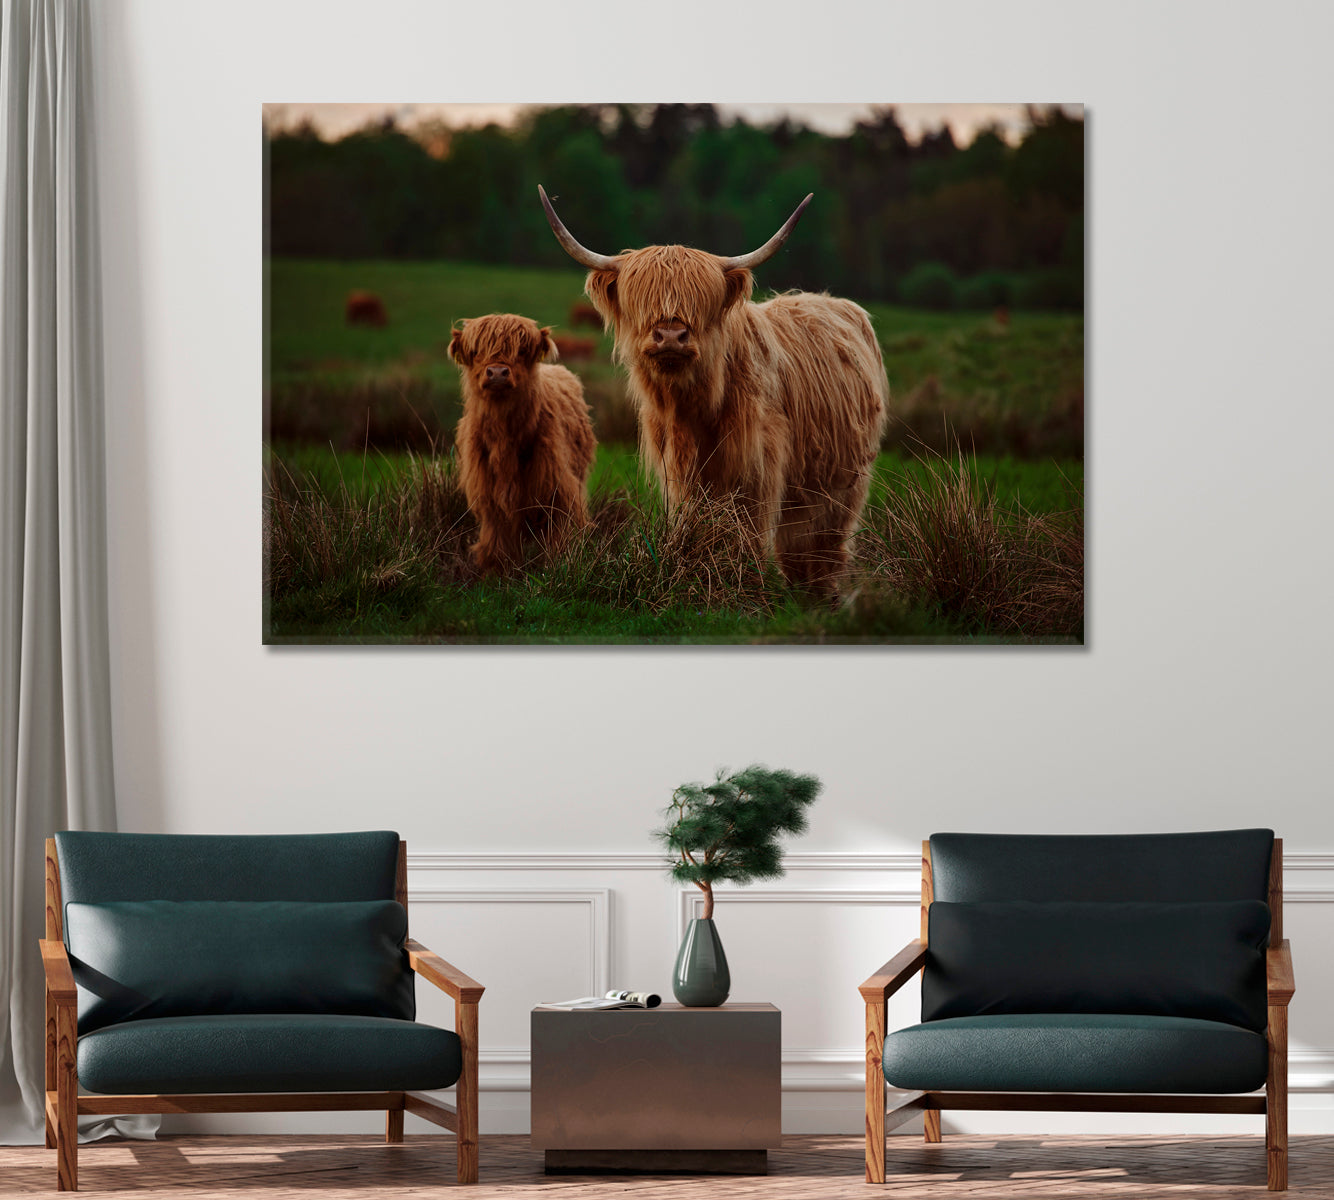 Highland Cow Mother and Calf In a Field Canvas Print-Canvas Print-CetArt-1 Panel-24x16 inches-CetArt